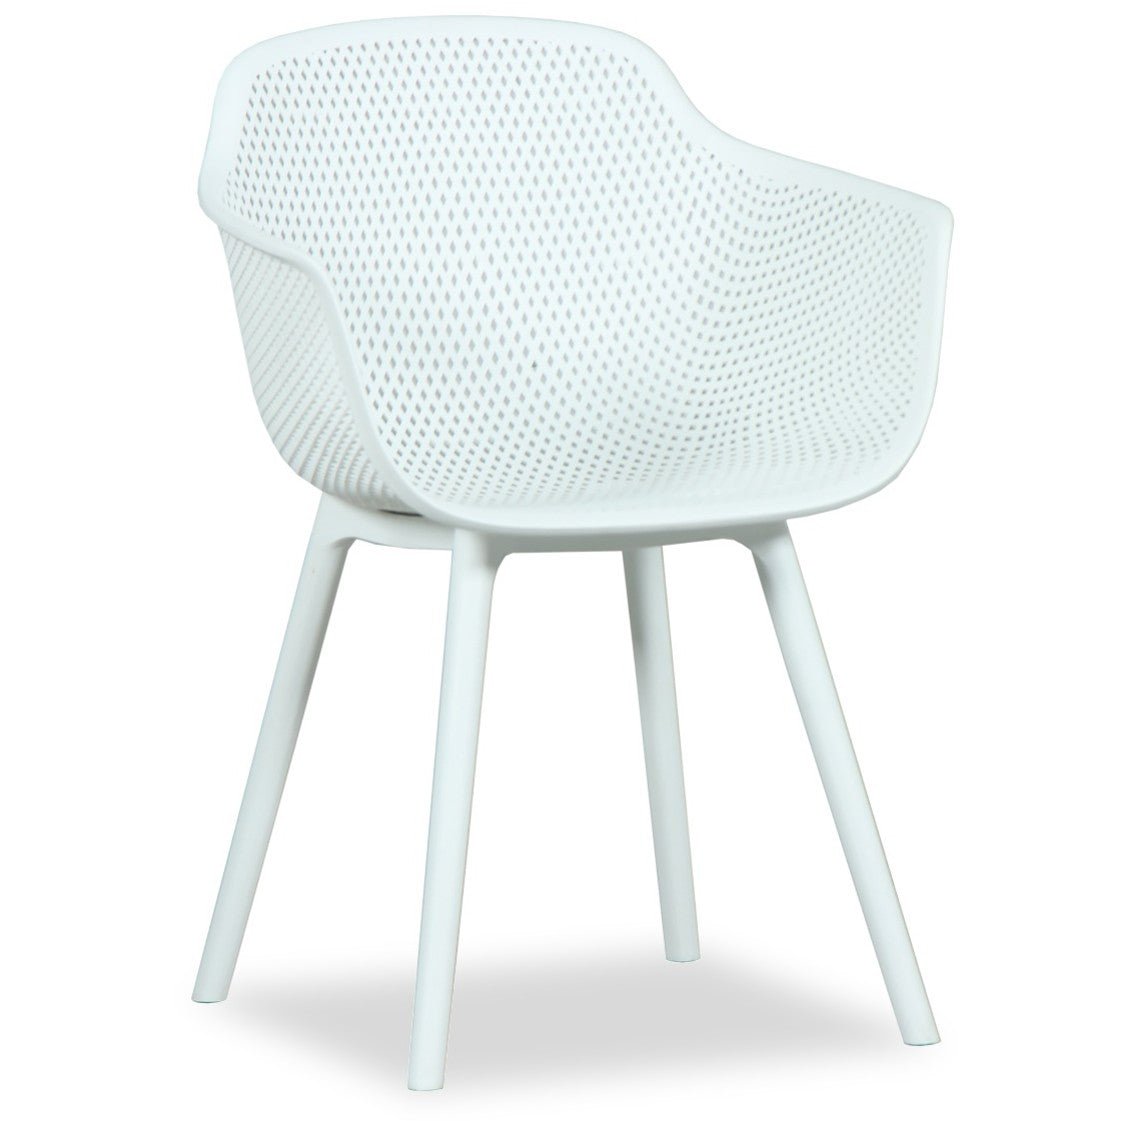 Ace PP Outdoor Dining Chair - White - Razzino Furniture